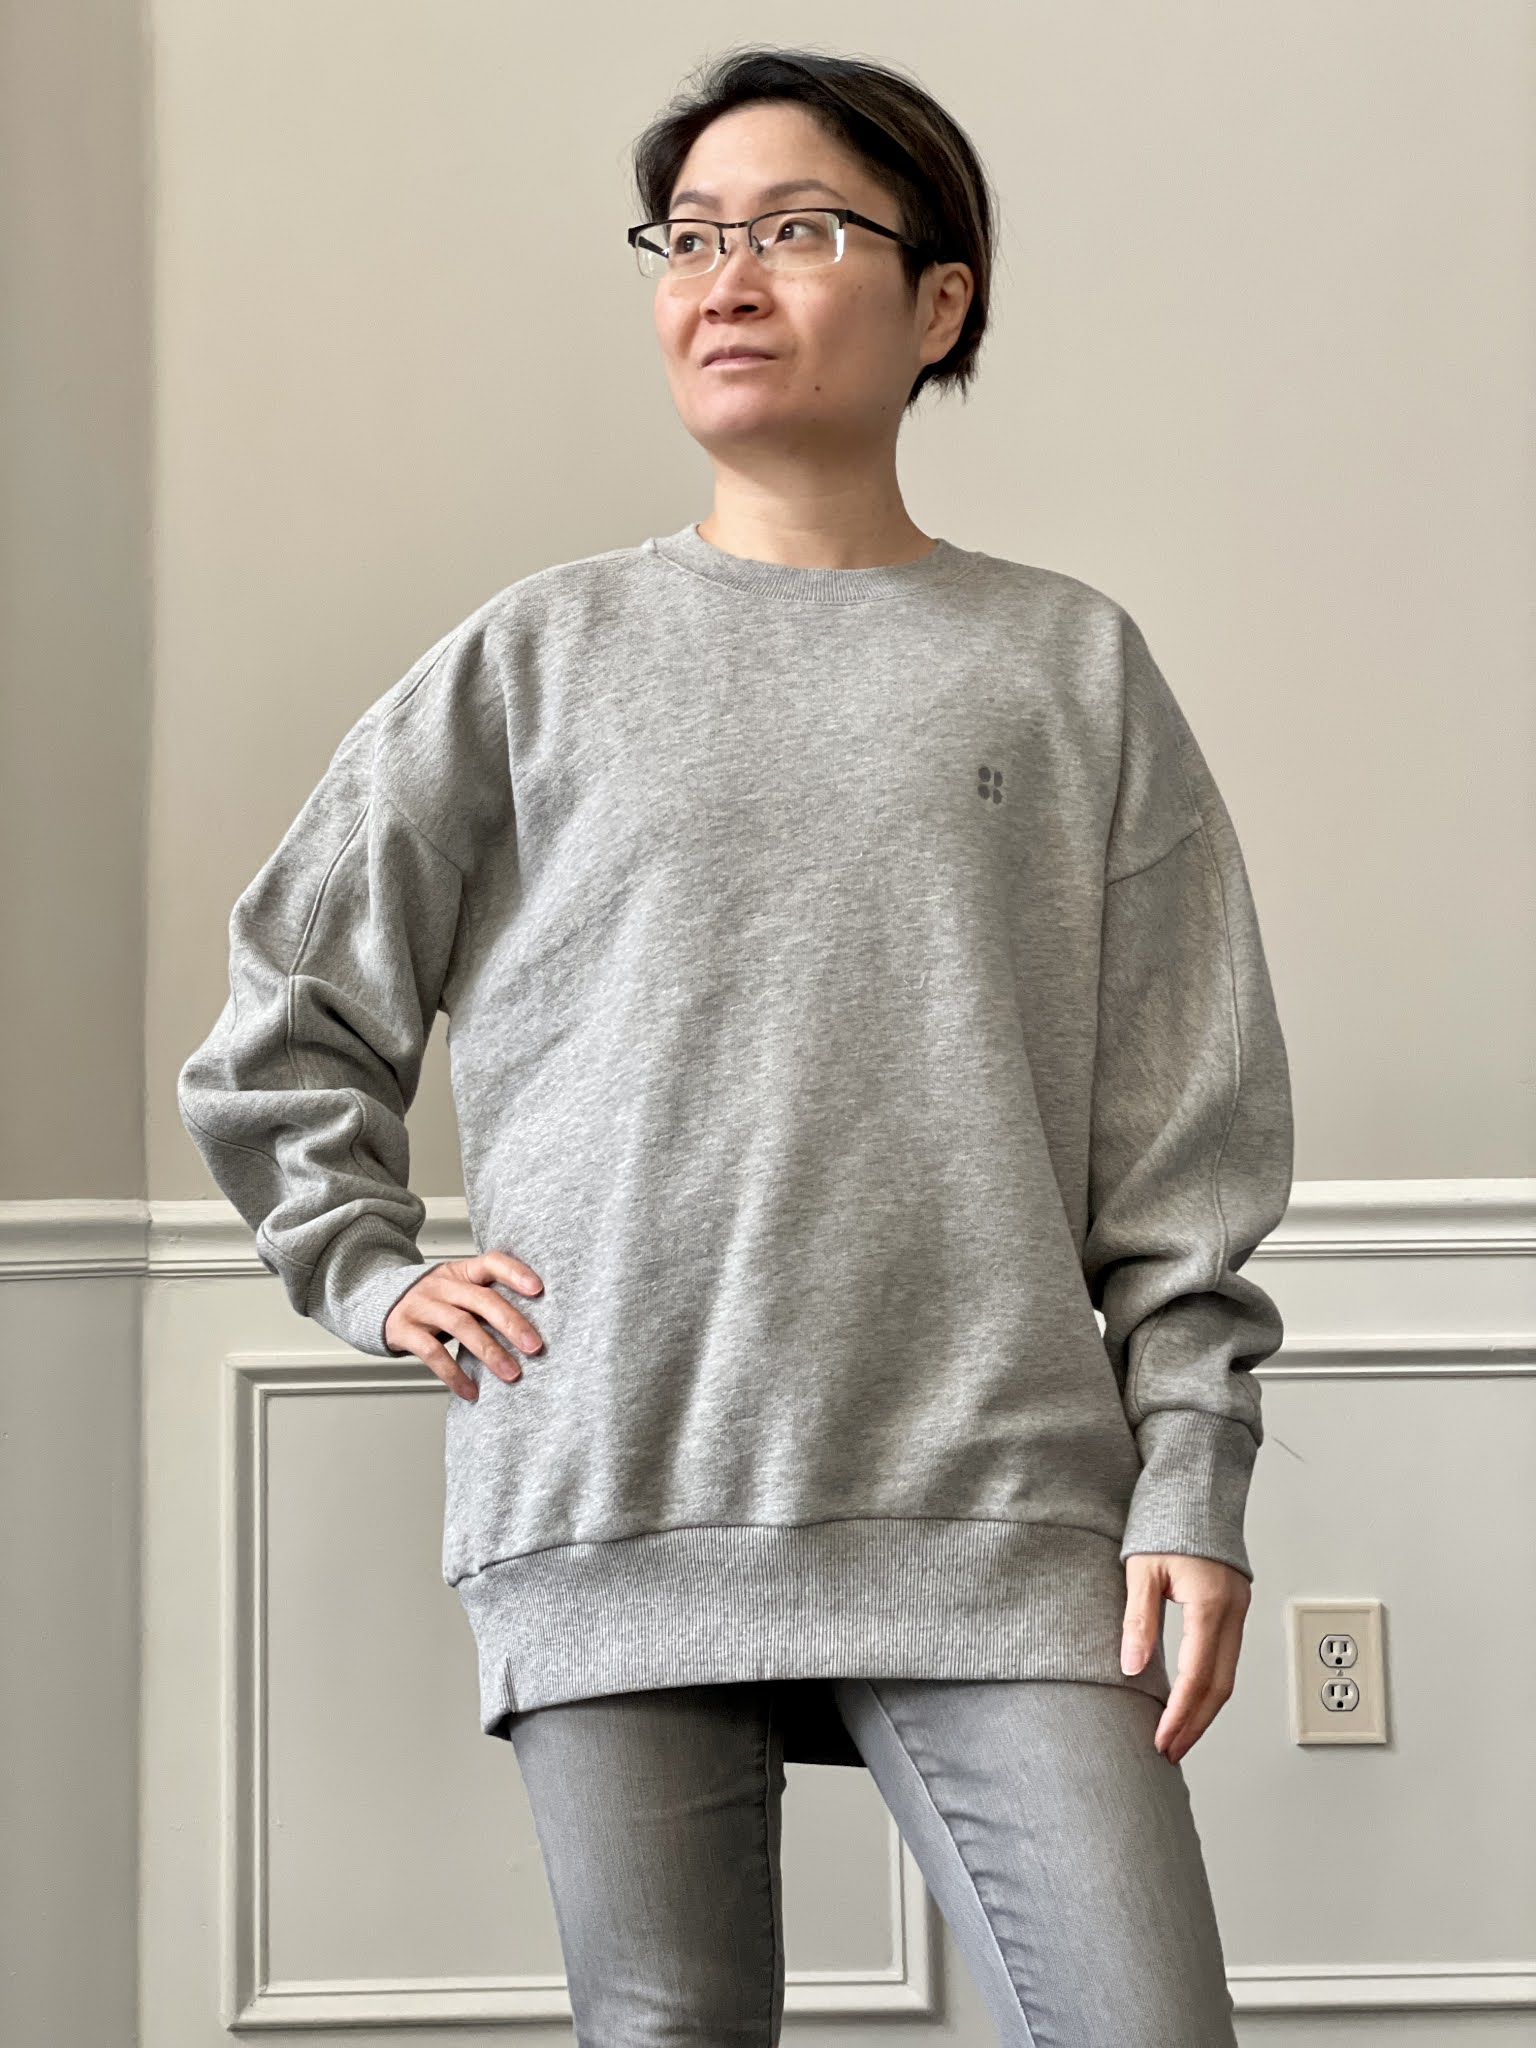 Fit Review Friday! Sweaty Betty Essentials Sweatshirt and Gary